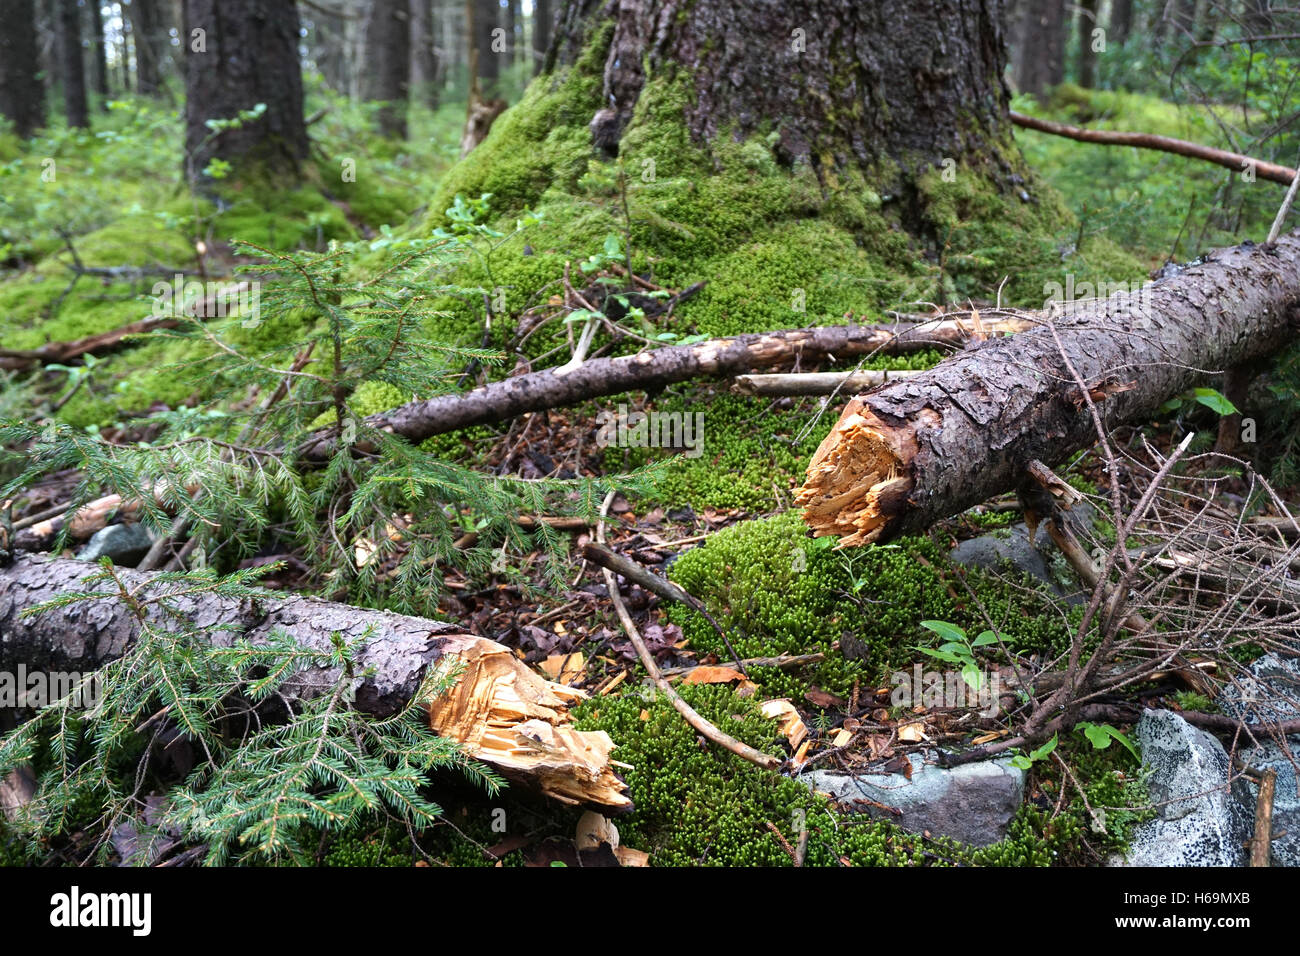 Fallen tree on the moss-covered forest floor in West Virginia's Cranberry Wilderness. Stock Photo